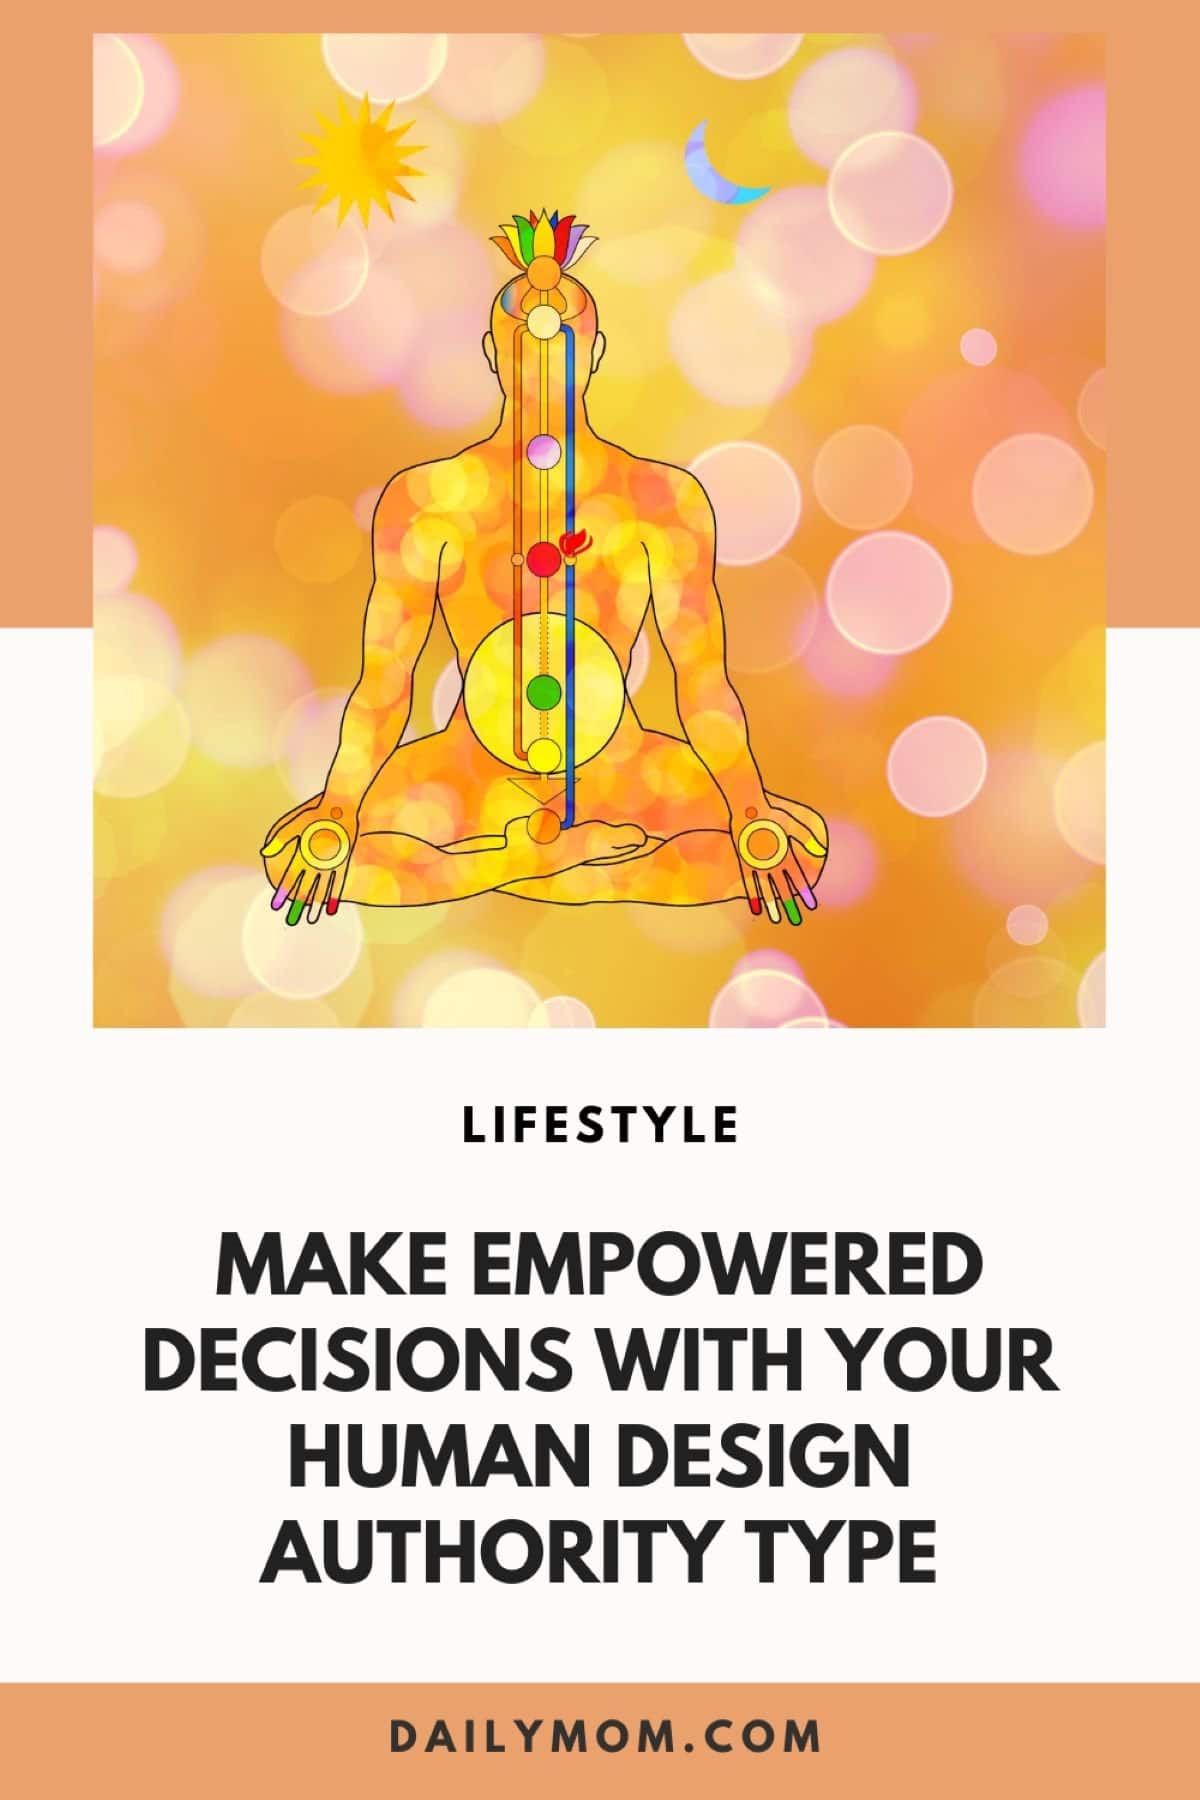 Human Design Authority Types: Understanding The 7 Inner Authorities And Outer Authorities And How They Impact Your Decision-Making 9 Daily Mom, Magazine For Families